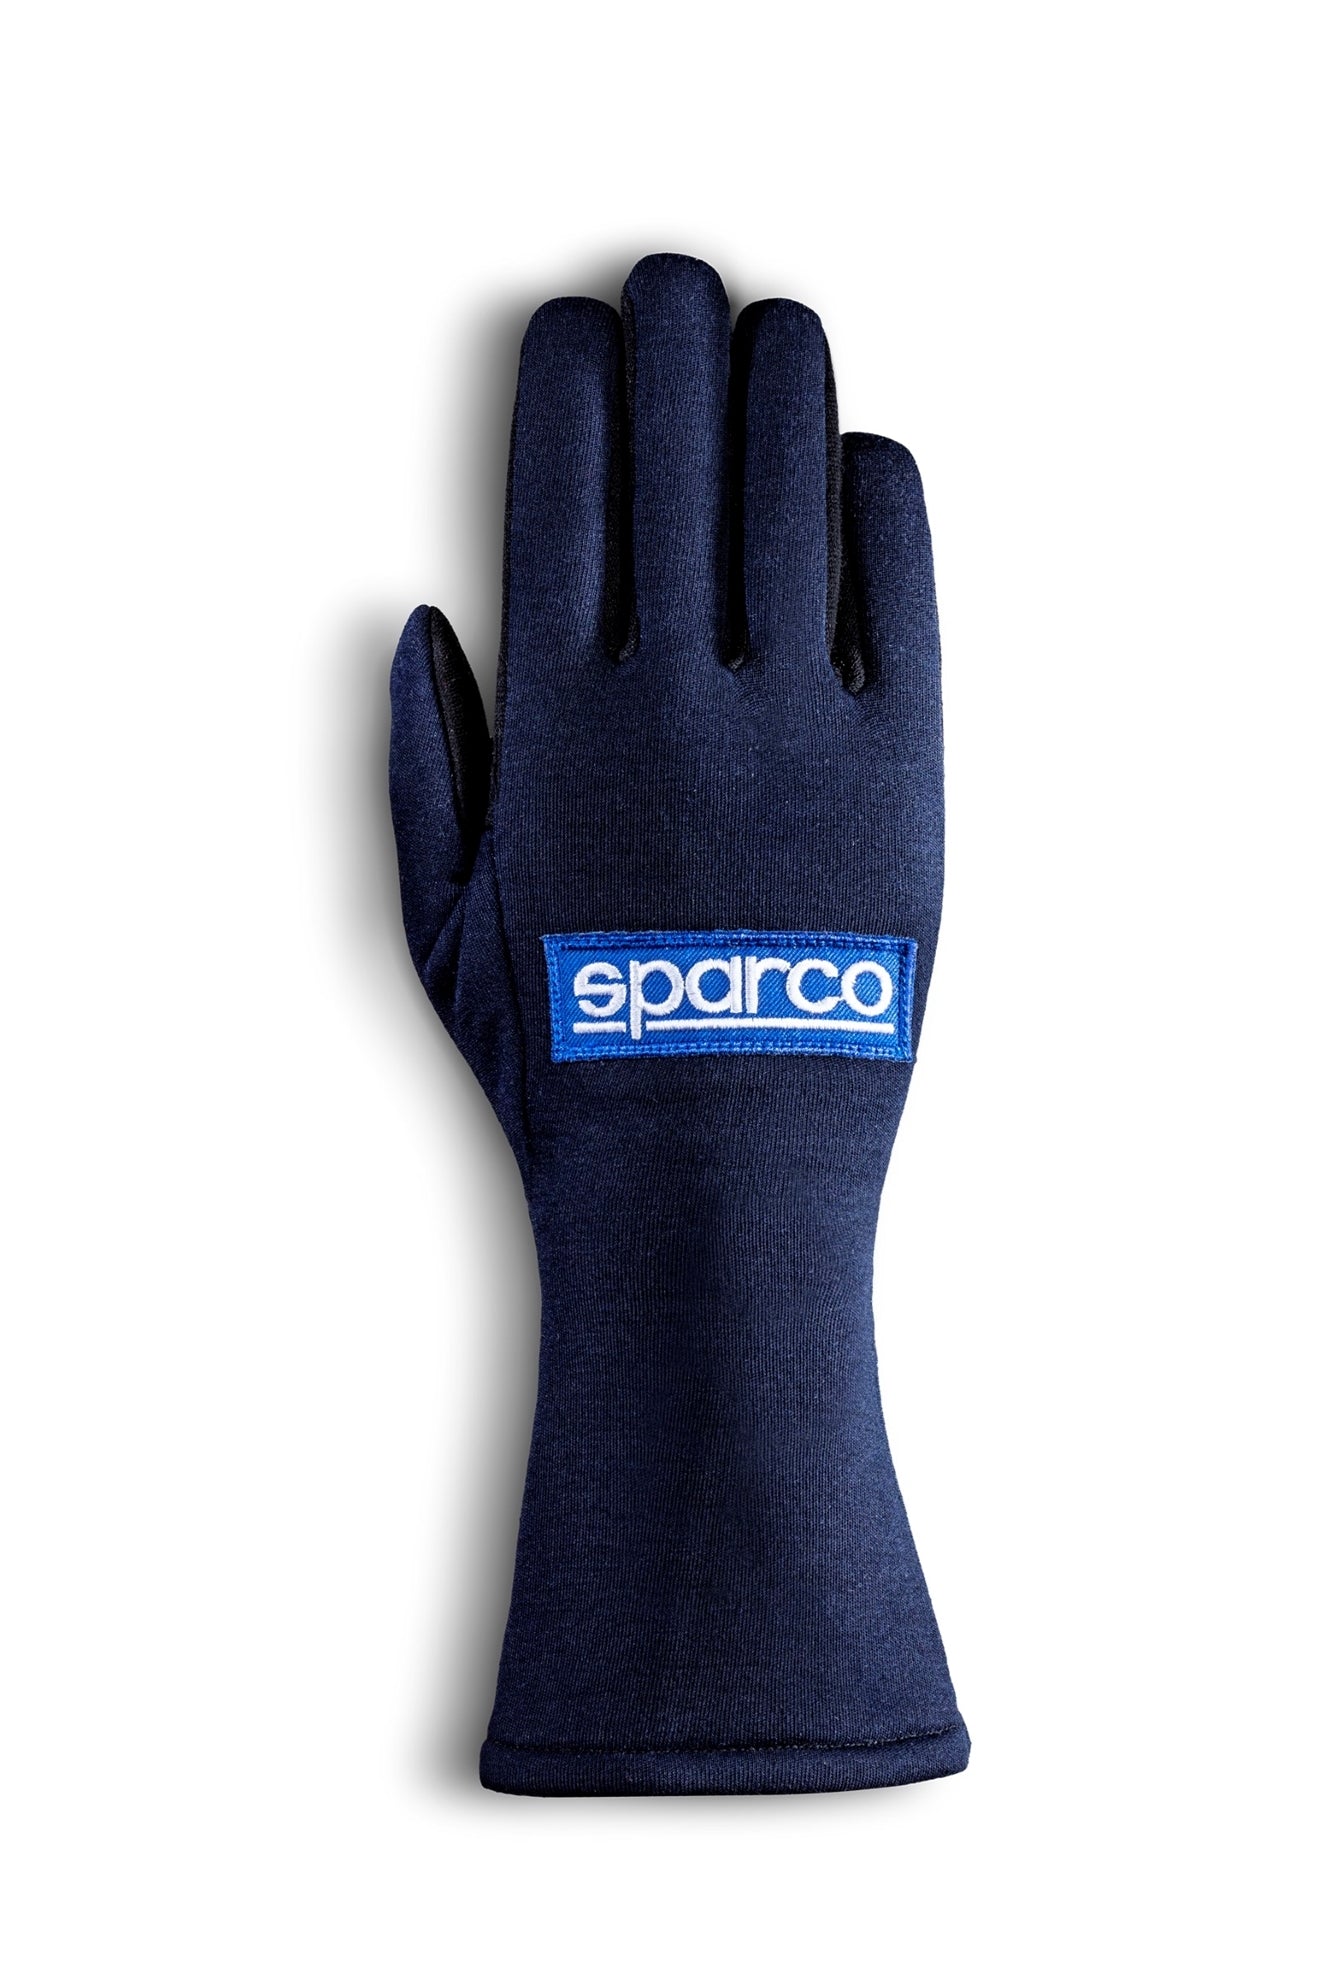 Sparco Land Classic Glove